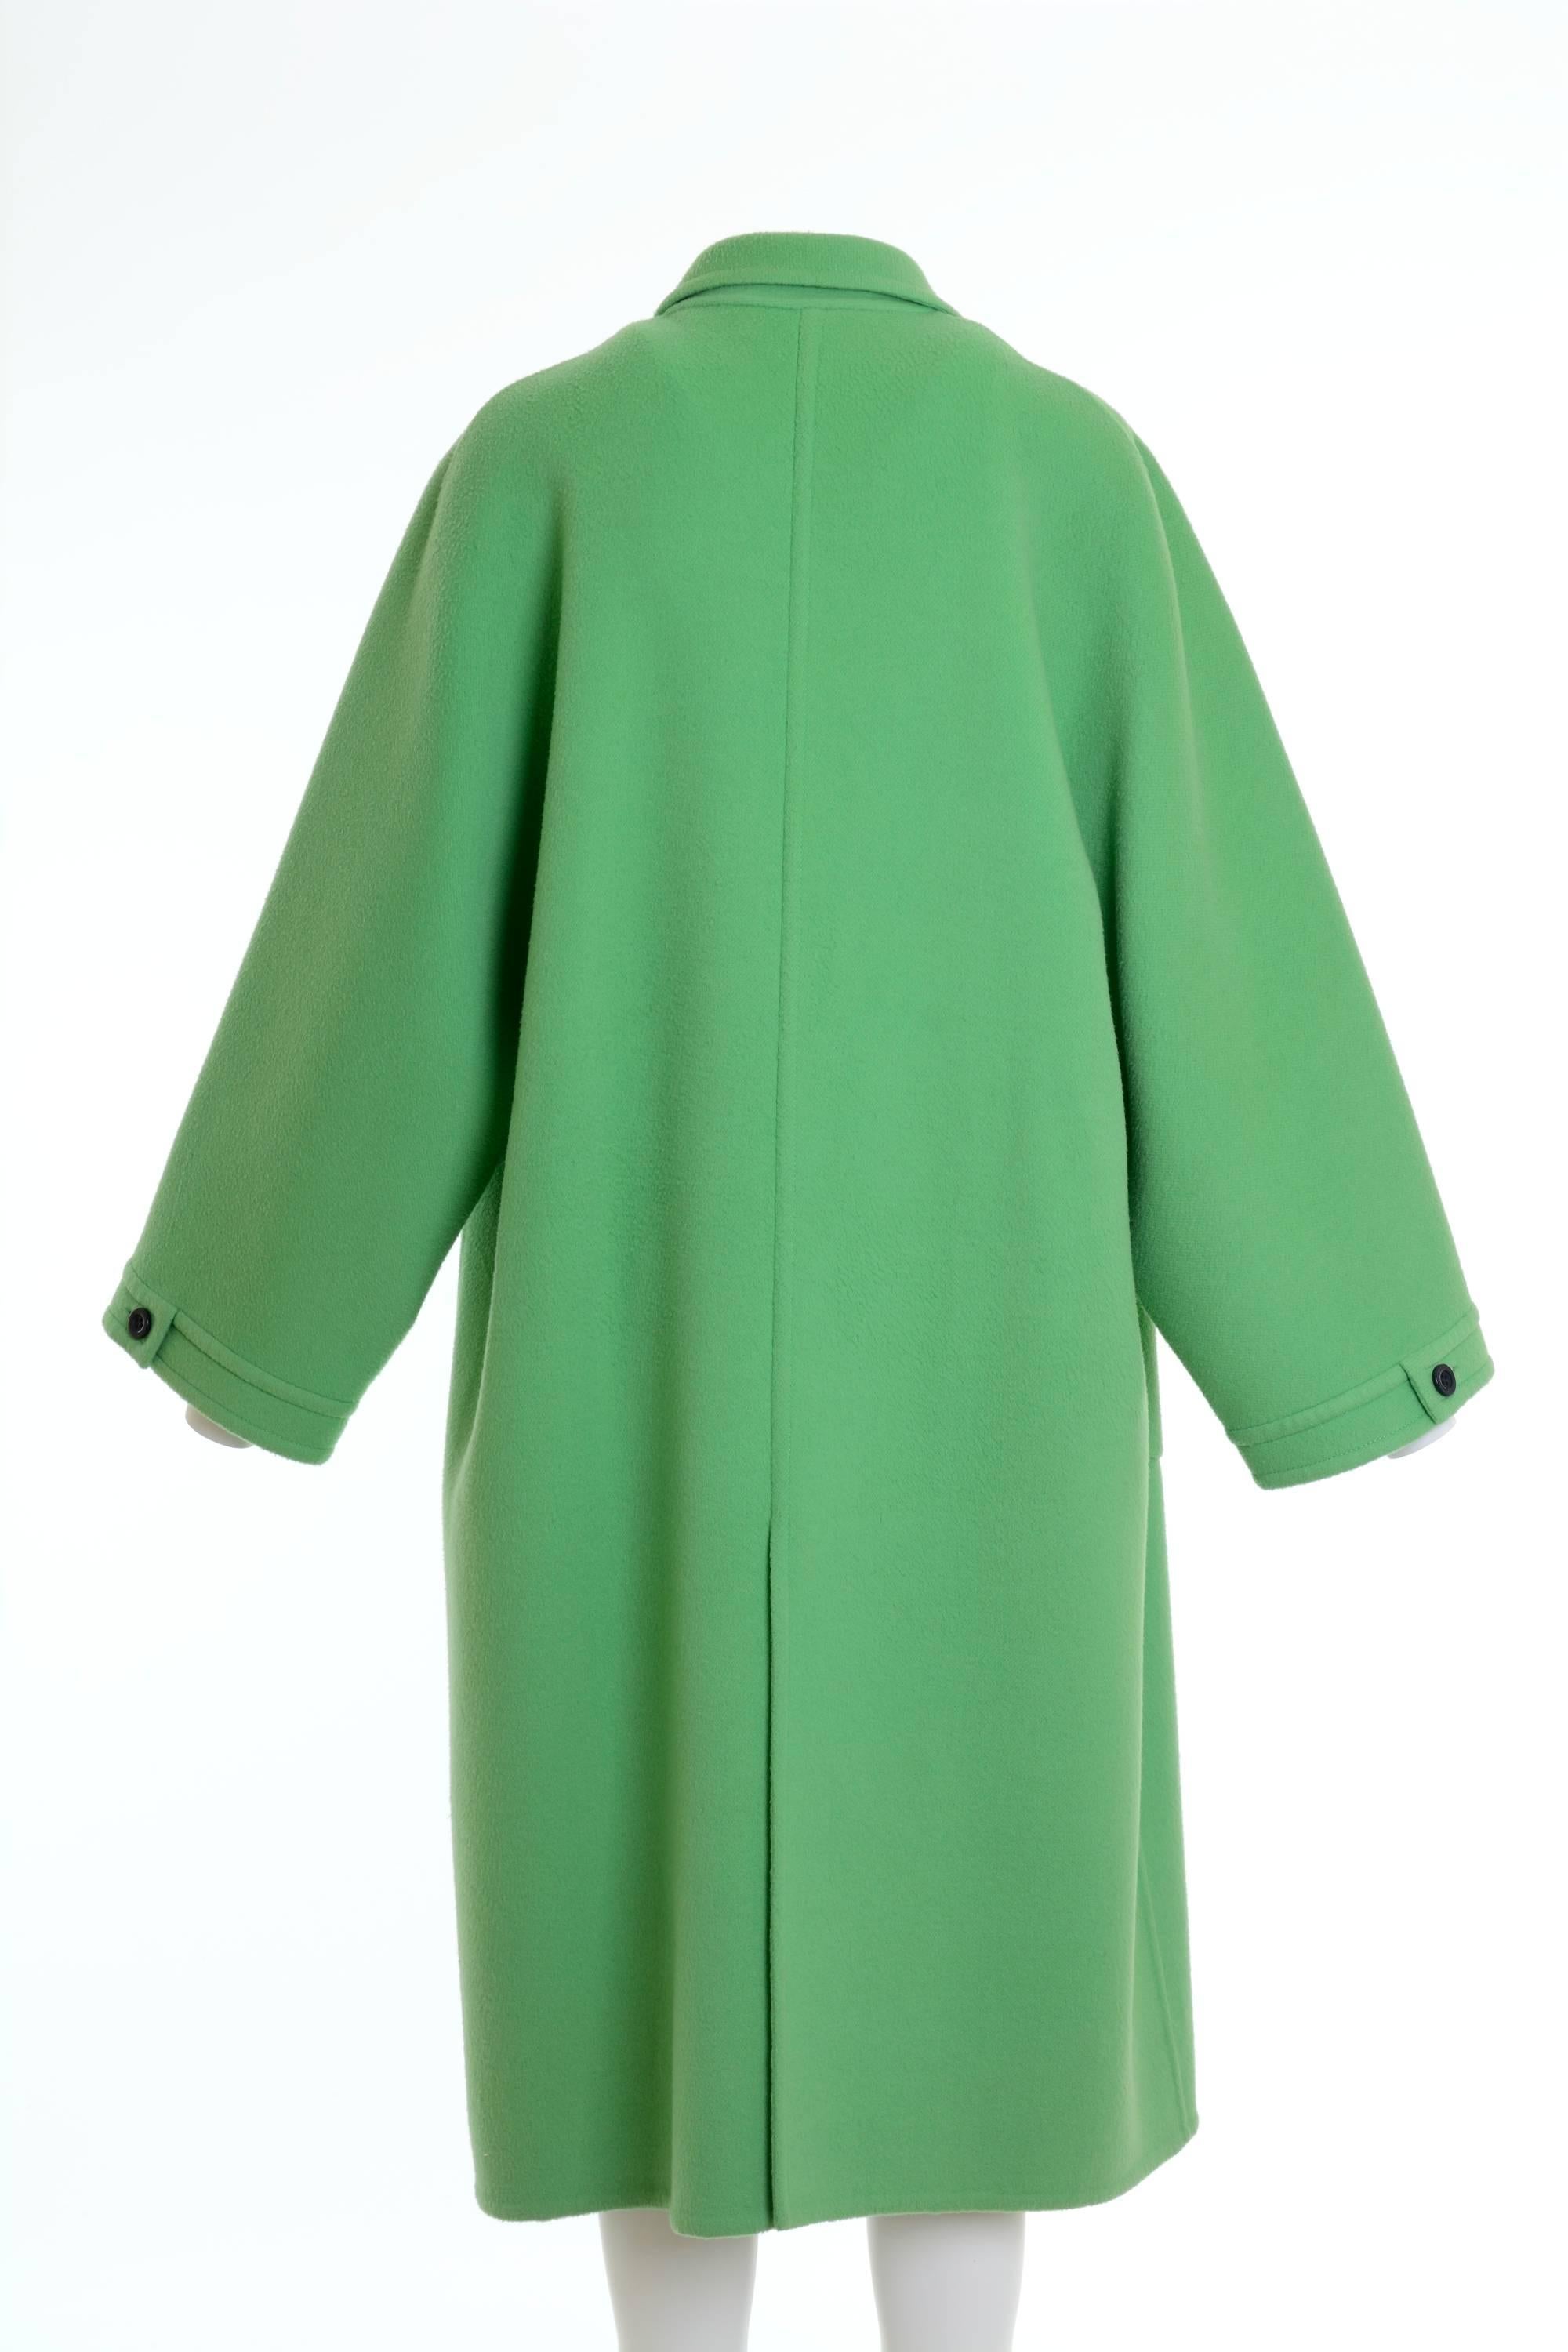 1980s Valentino Couture oversize coat in apple green wool fabric, without buttons, patch pockets and raglan sleeves.

Good Vintage Condition

Label : Valentino Couture
Fabric: wool
Colour: apple green

Measurements:
Estimated size: M/L
Shoulders: 17